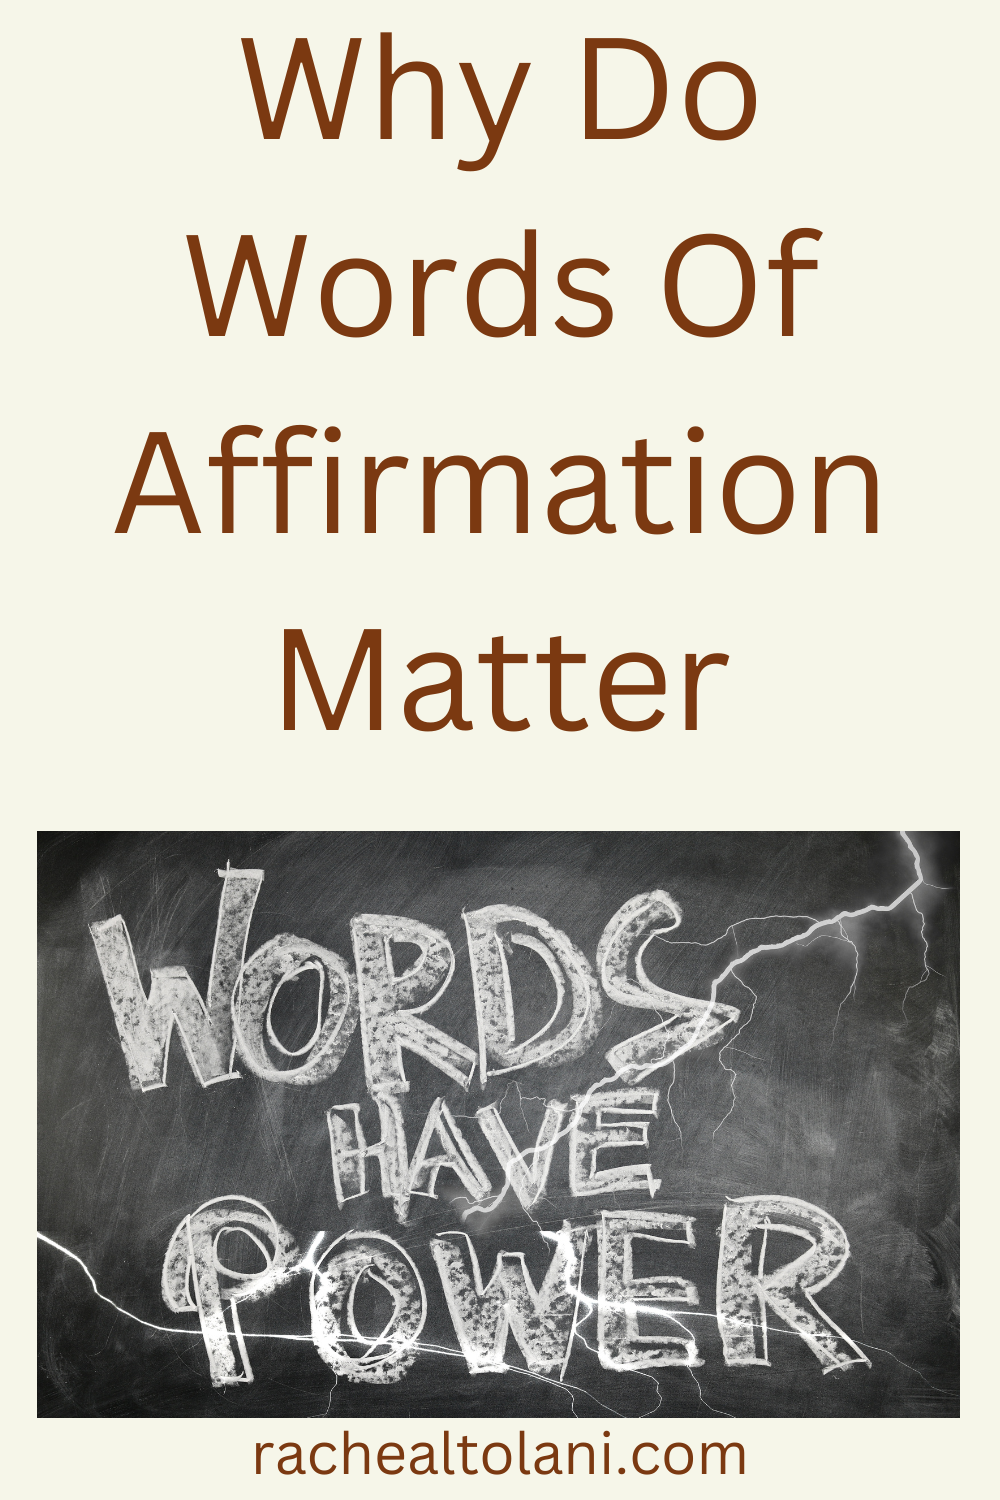 Words of affirmation and its example